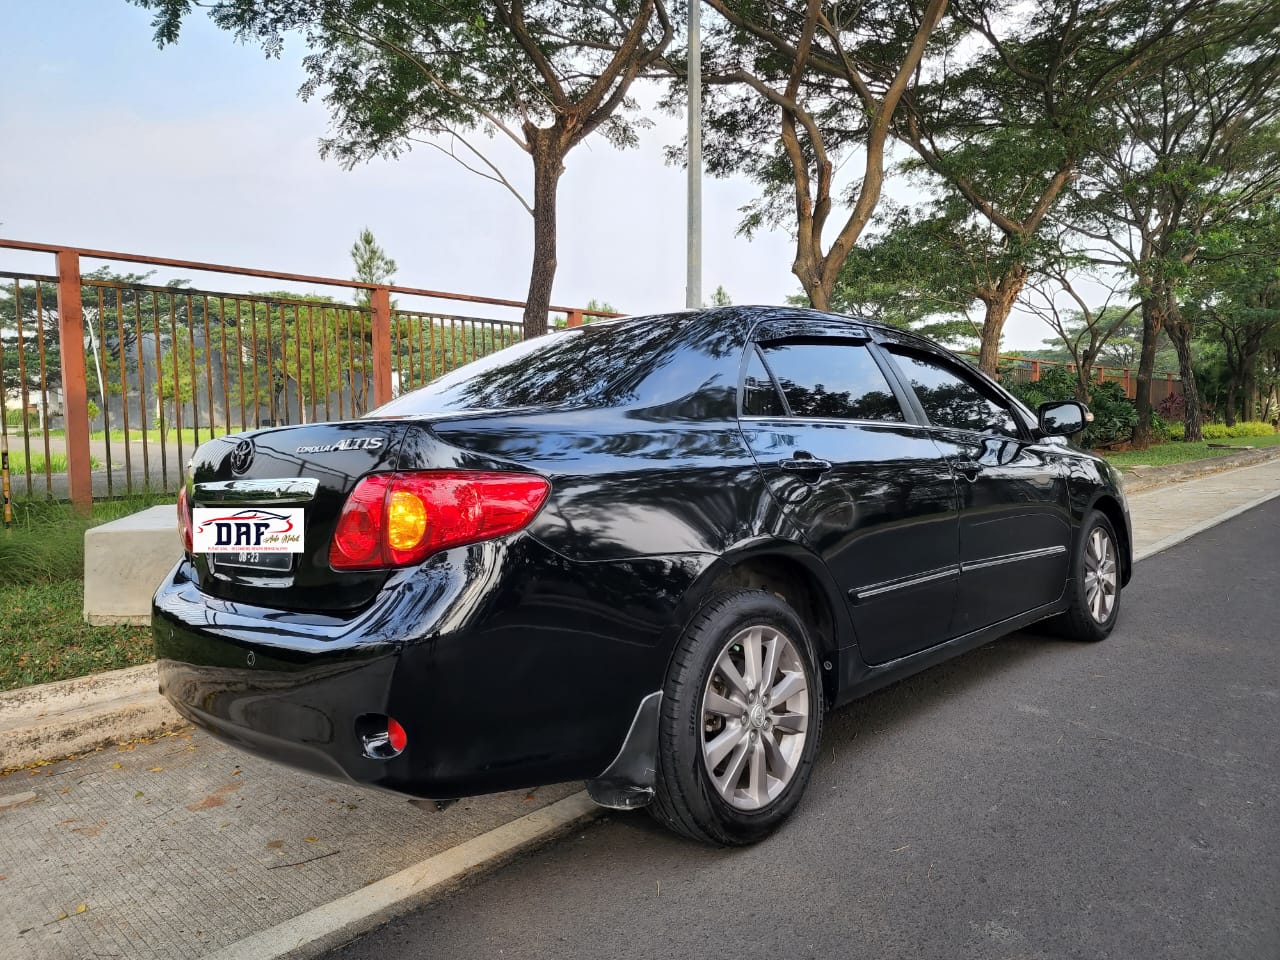 Used 2008 Toyota Corolla Altis  1.8 G AT 1.8 G AT for sale